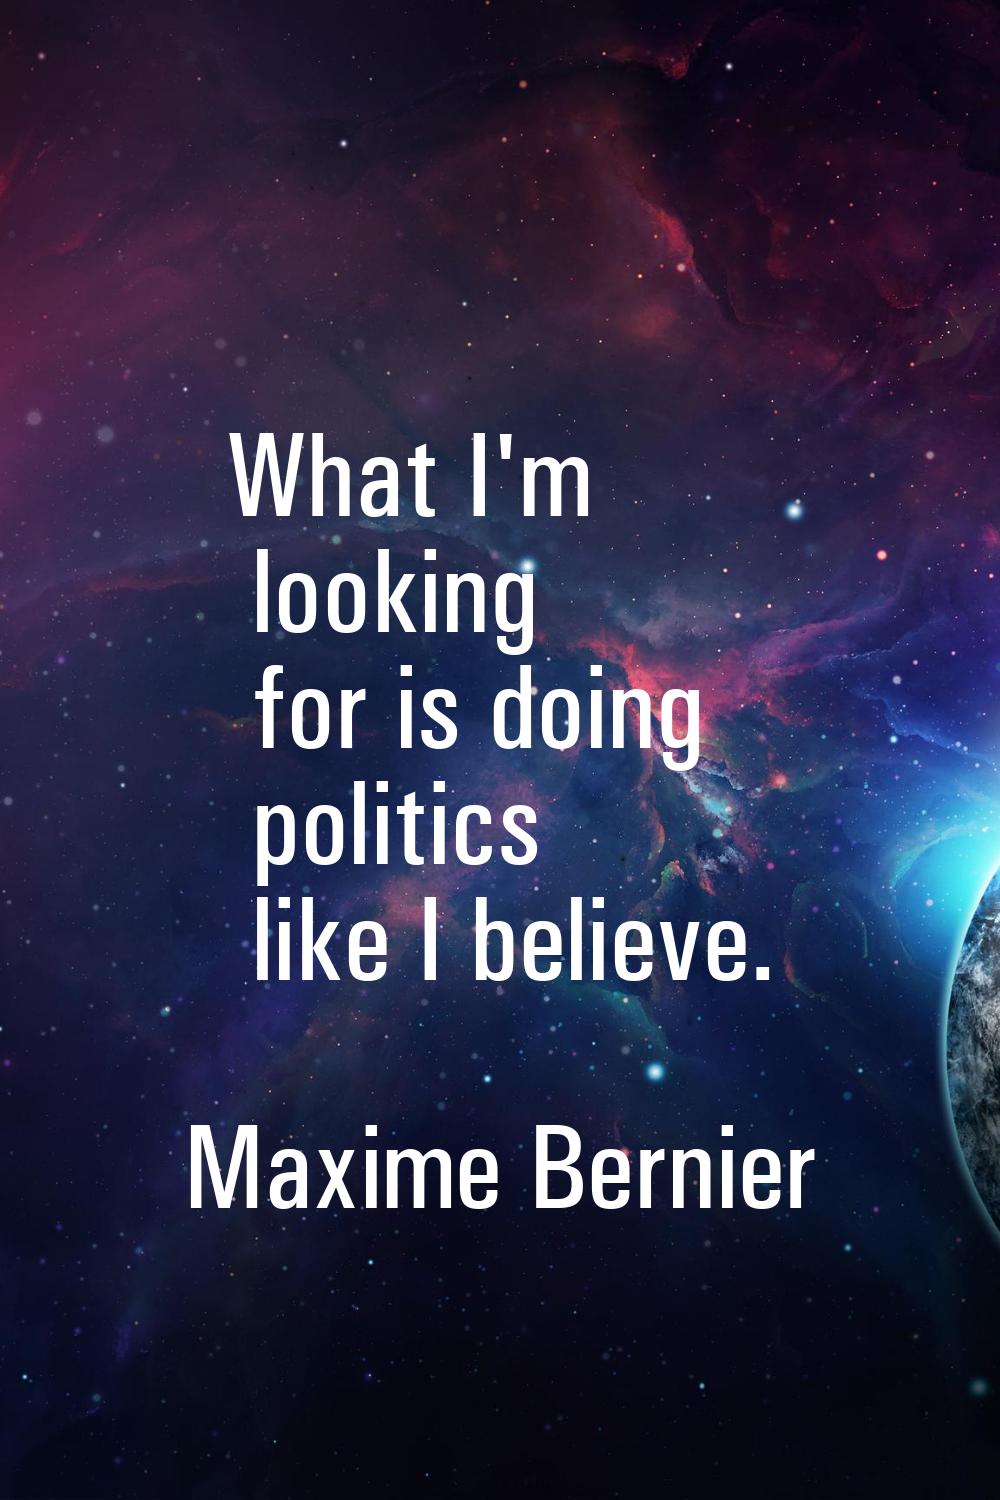 What I'm looking for is doing politics like I believe.